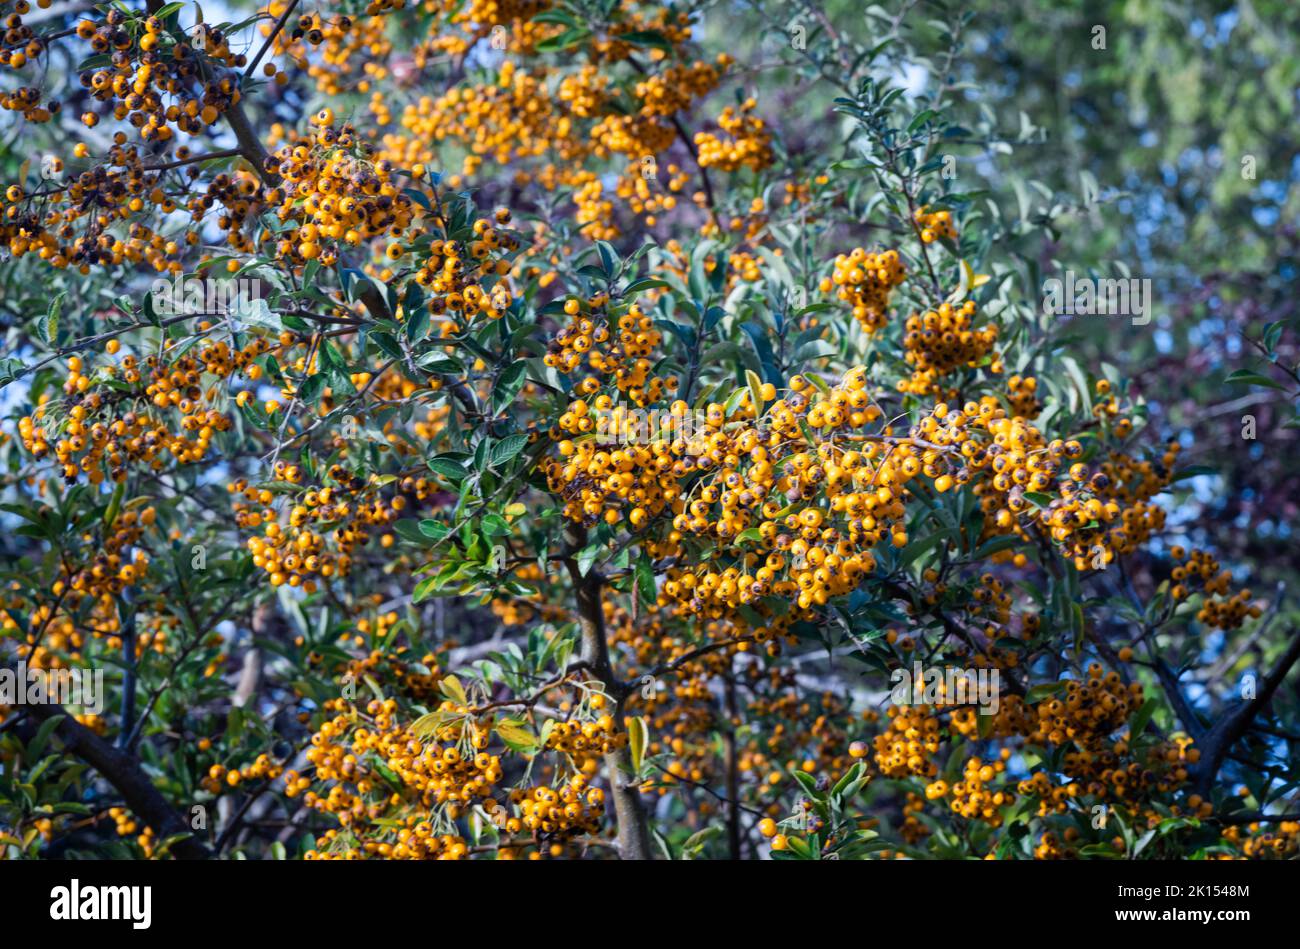 Masses of yellow berries on a firethorn shrub (Pyracantha coccinea) in a garden in southern England. Stock Photo